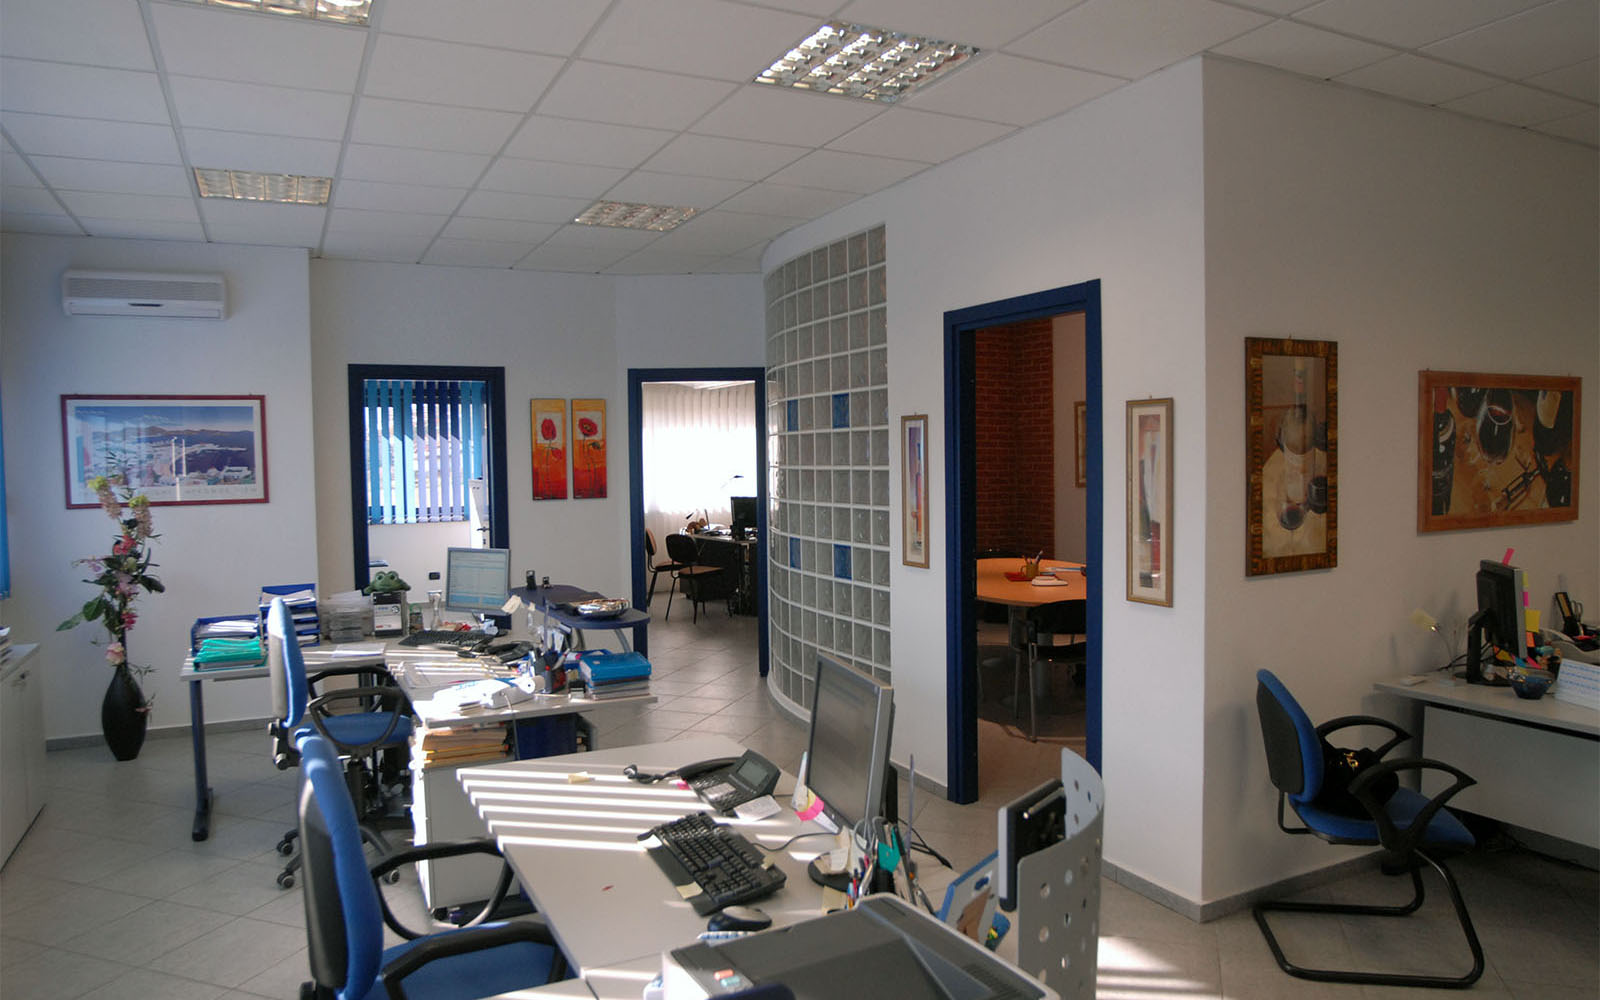 Some of our offices